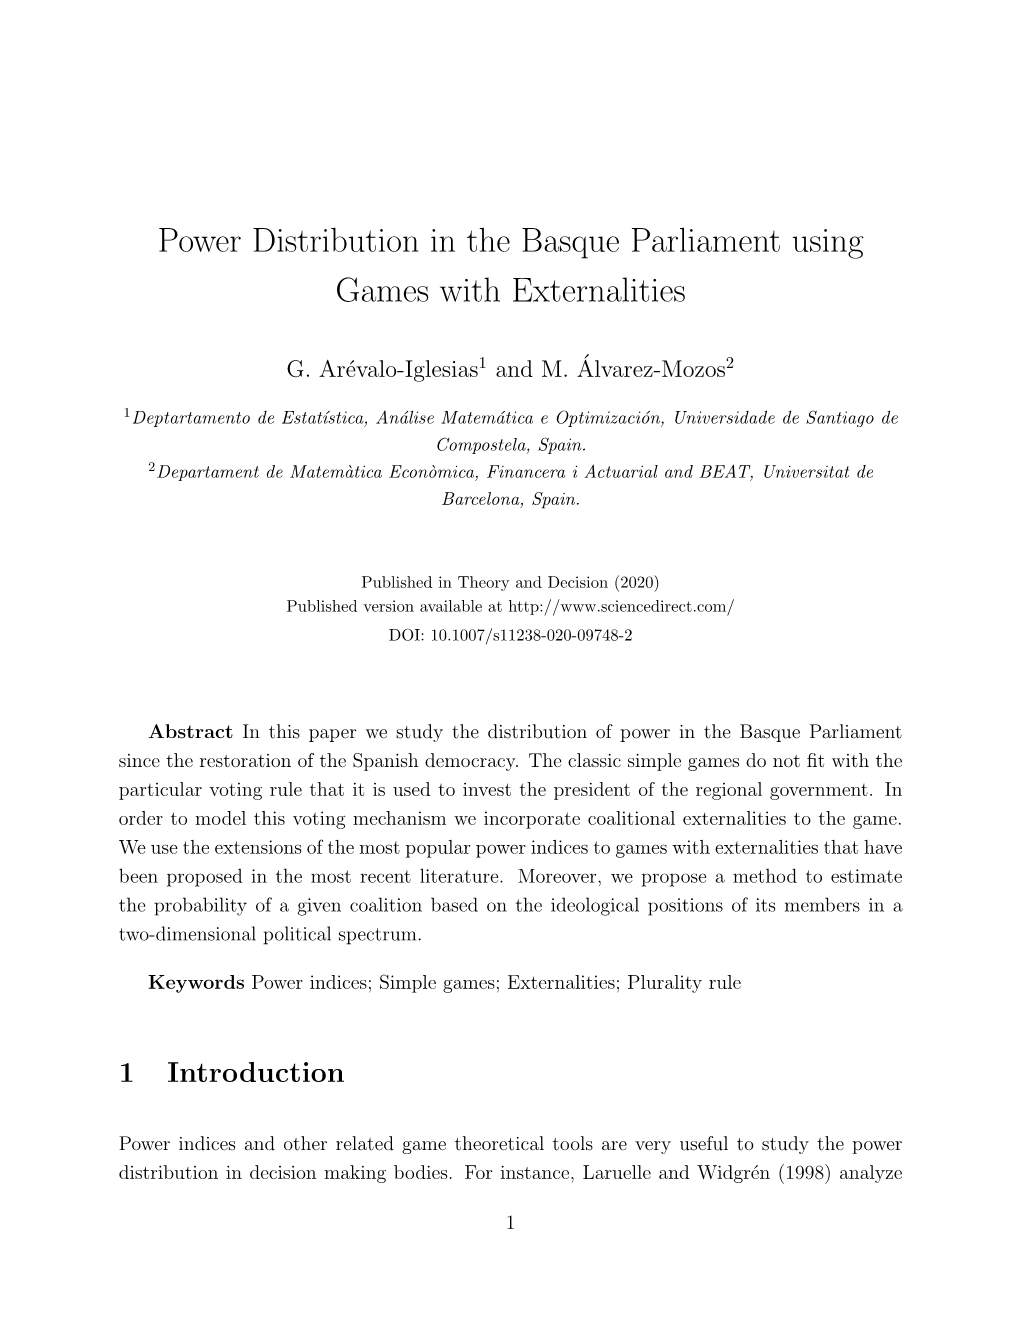 Power Distribution in the Basque Parliament Using Games with Externalities